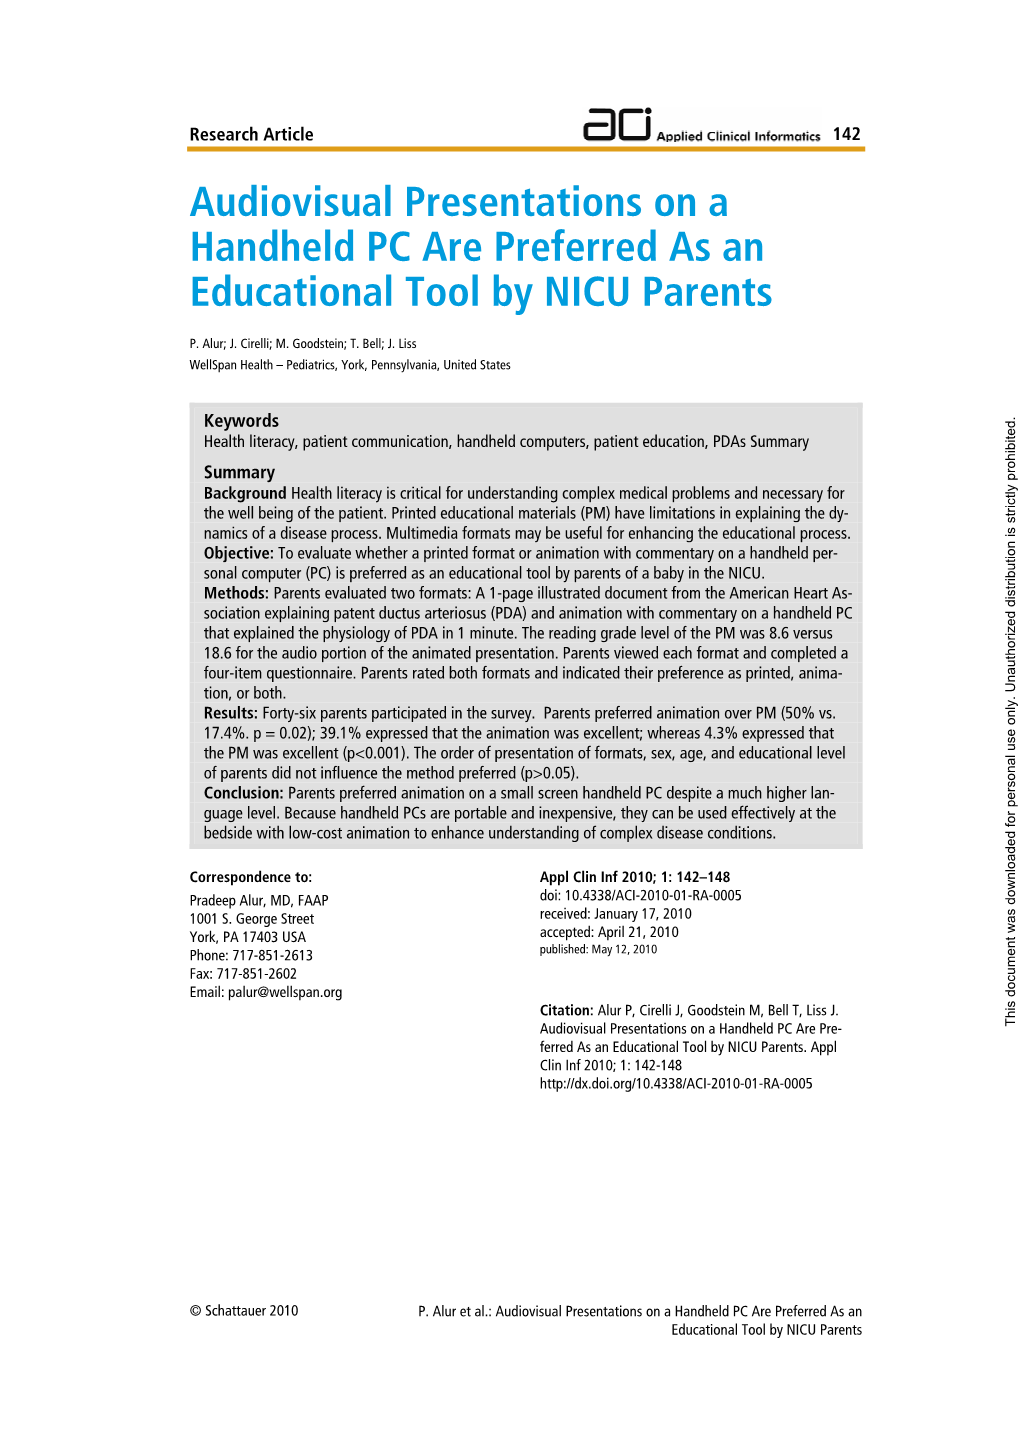 Audiovisual Presentations on a Handheld PC Are Preferred As an Educational Tool by NICU Parents